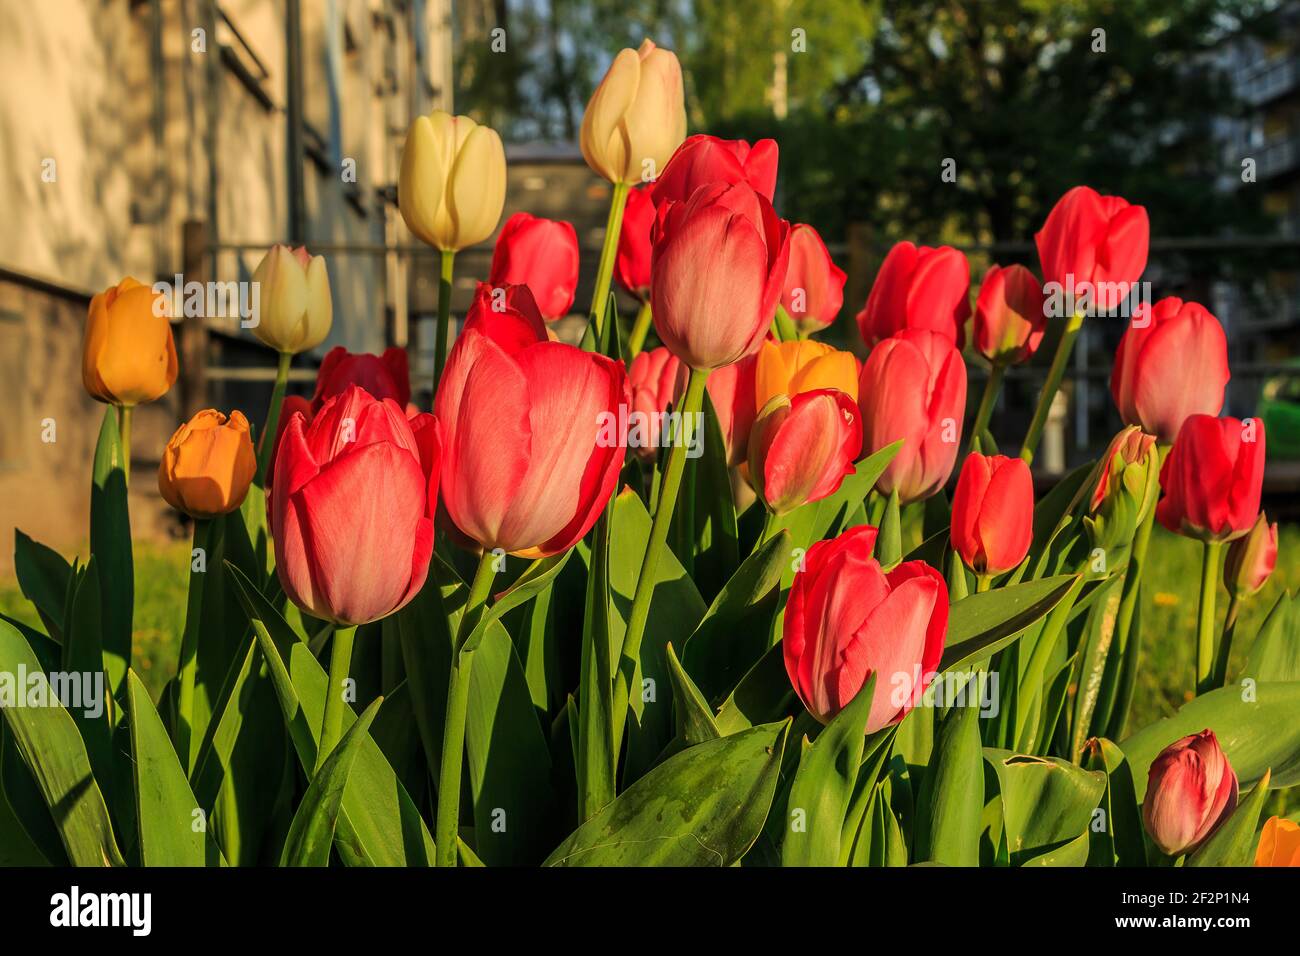 several yellow red and orange tulips in sunshine. Slightly opened flowers in the front yard of a house in spring. Green petals and flower stems. Stock Photo